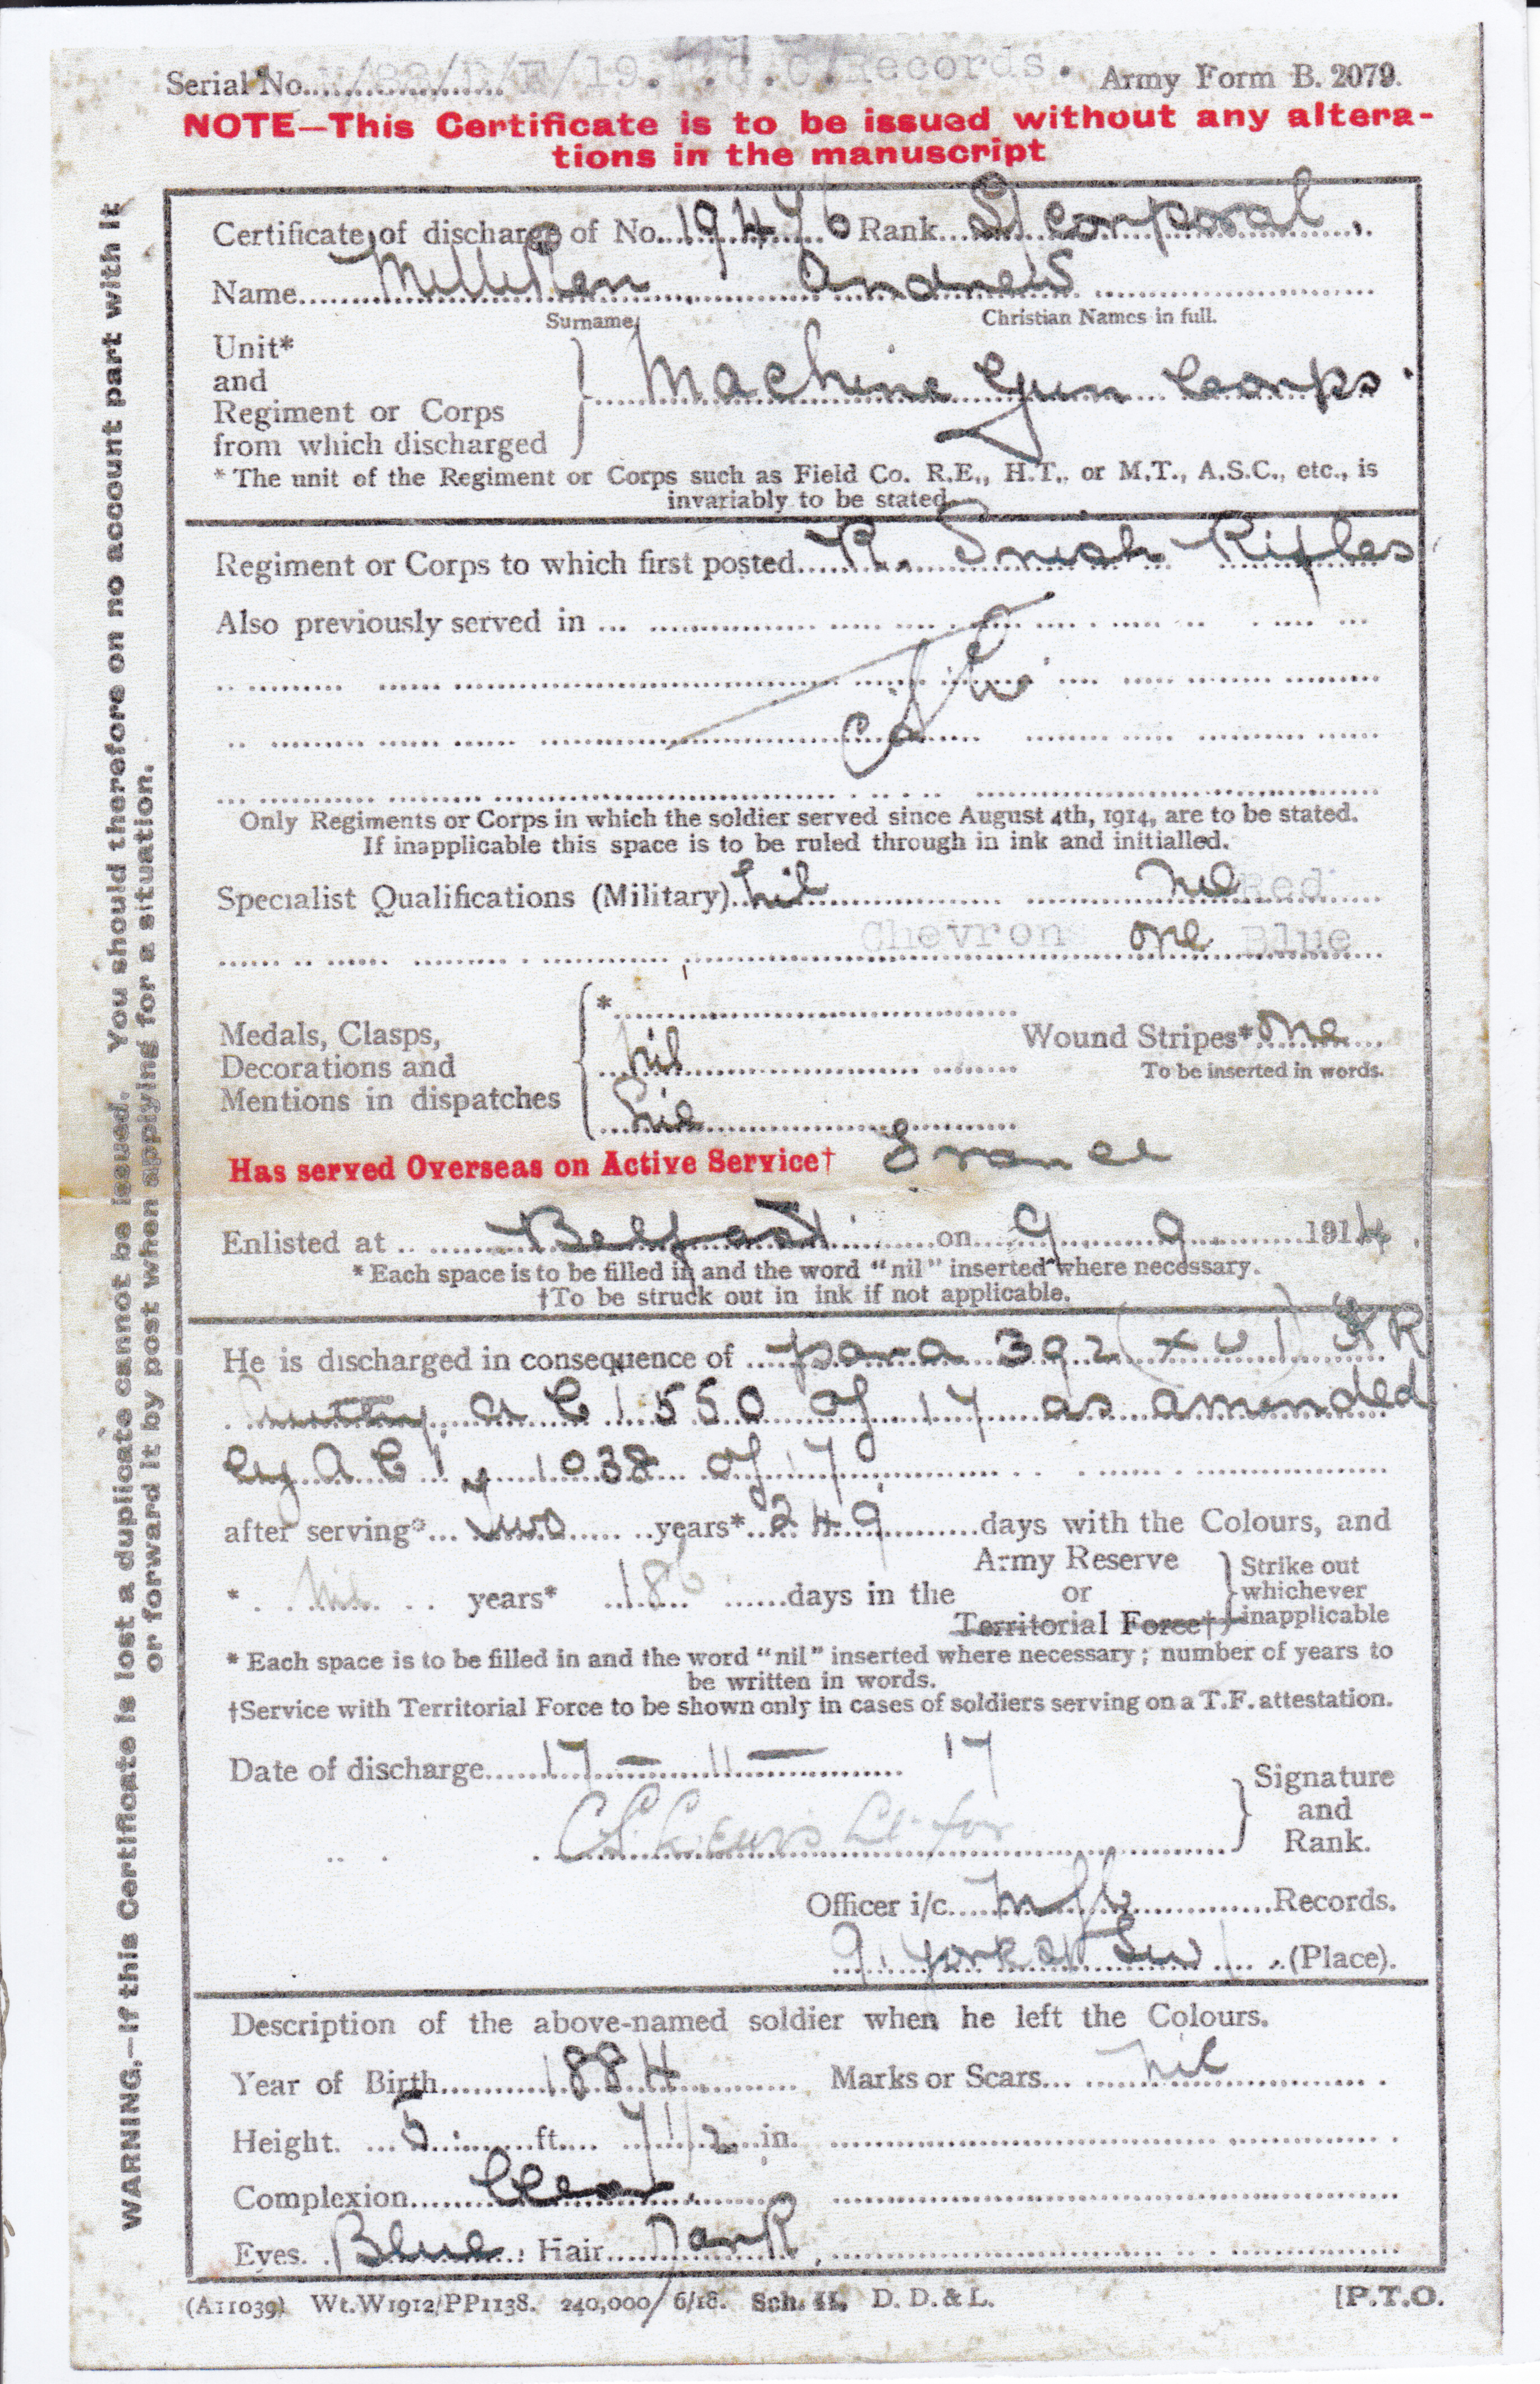 Lance Corporal William Andrew’s discharge papers signed by C.S. Lewis.